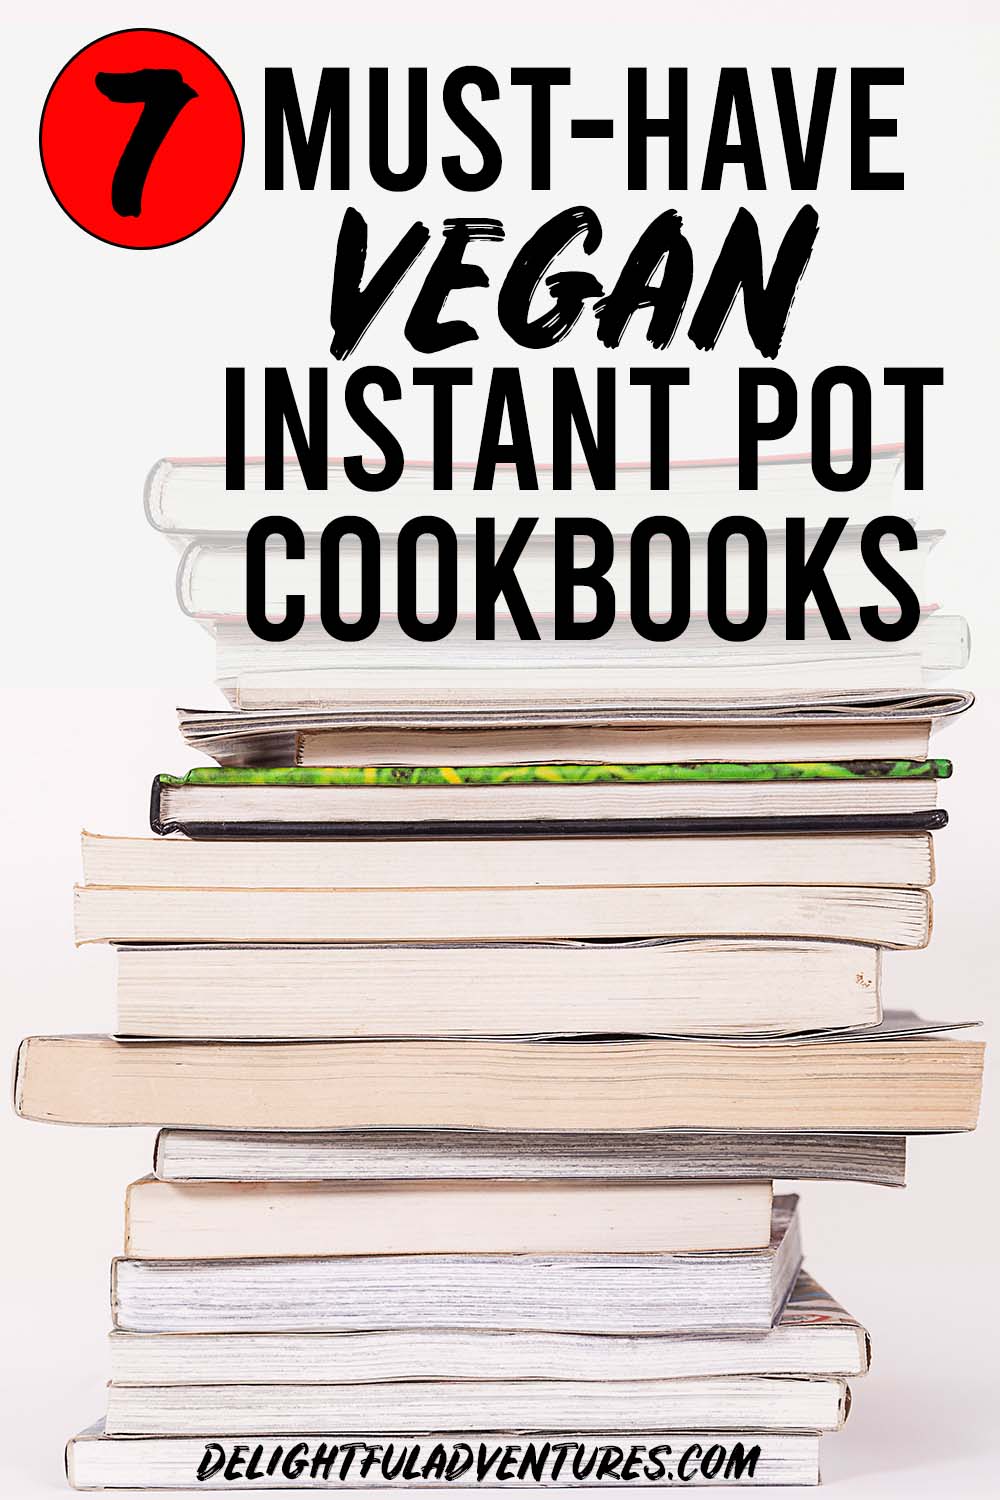 A stack on books on a table, a text overlay over the books says 7 must-have vegan Instant Pot cookbooks.